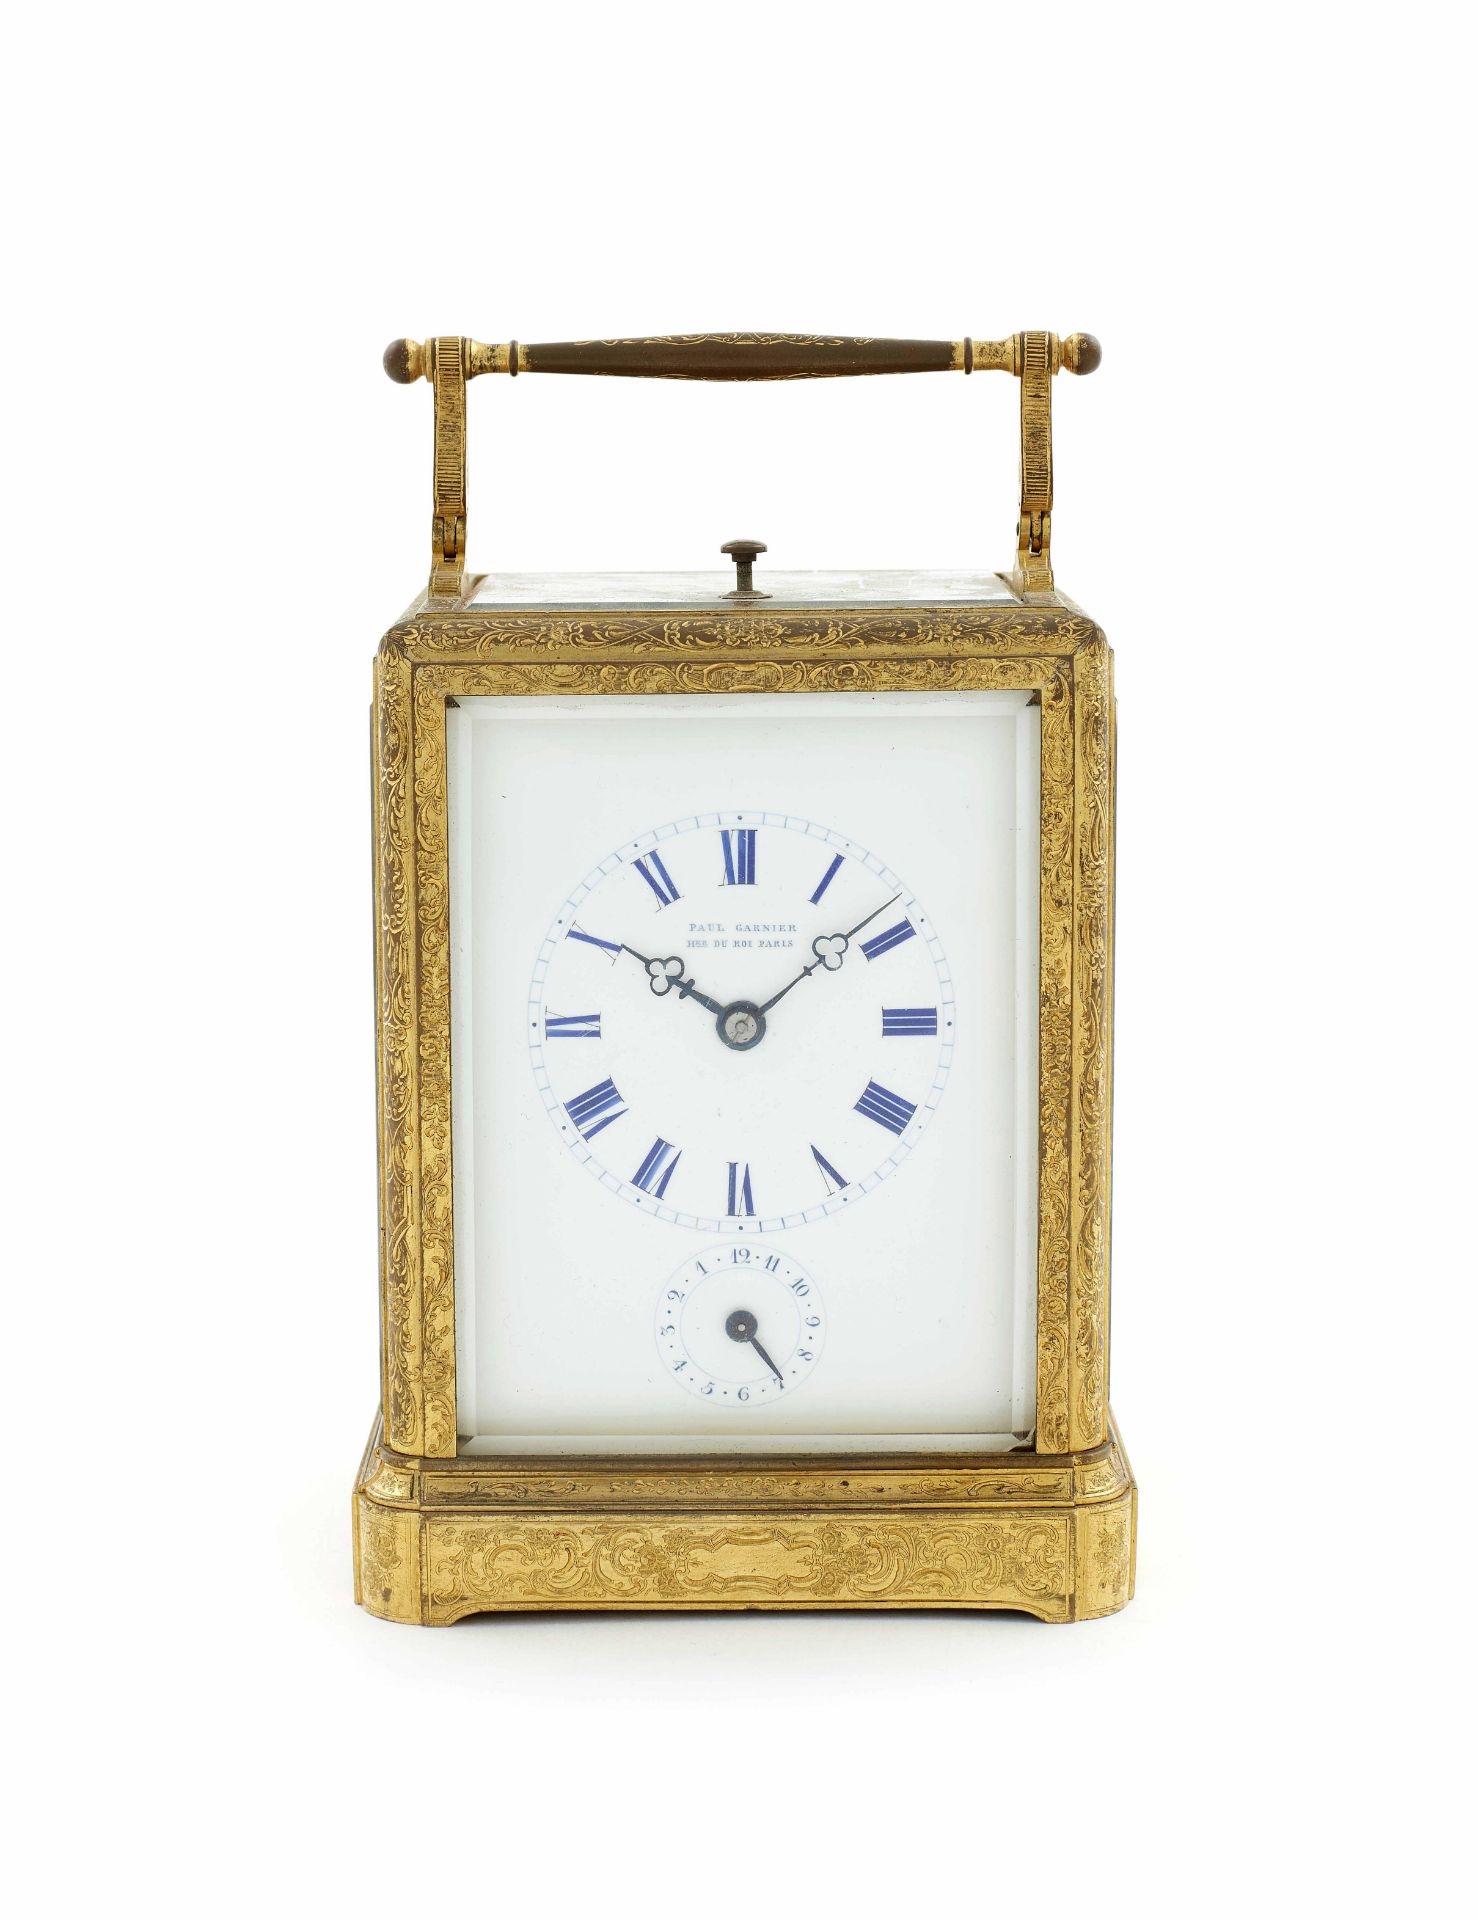 A rare mid 19th century French quarter striking carriage clock with chaff cutter escapement and a...